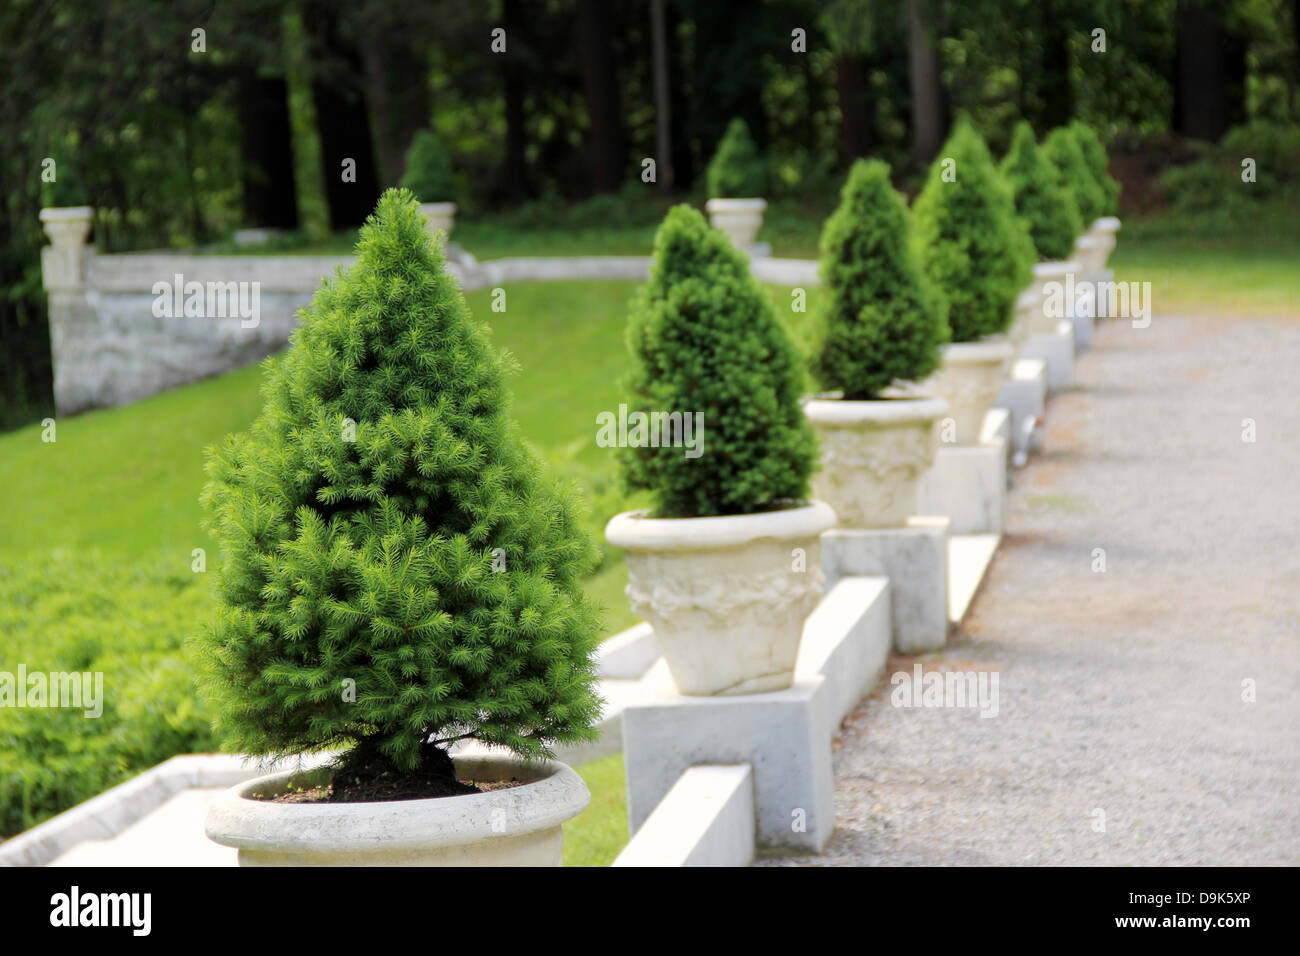 Several dwarf pine trees in marble pots placed in a neat line alongside pebbled walkway and well-manicured lawns. Stock Photo